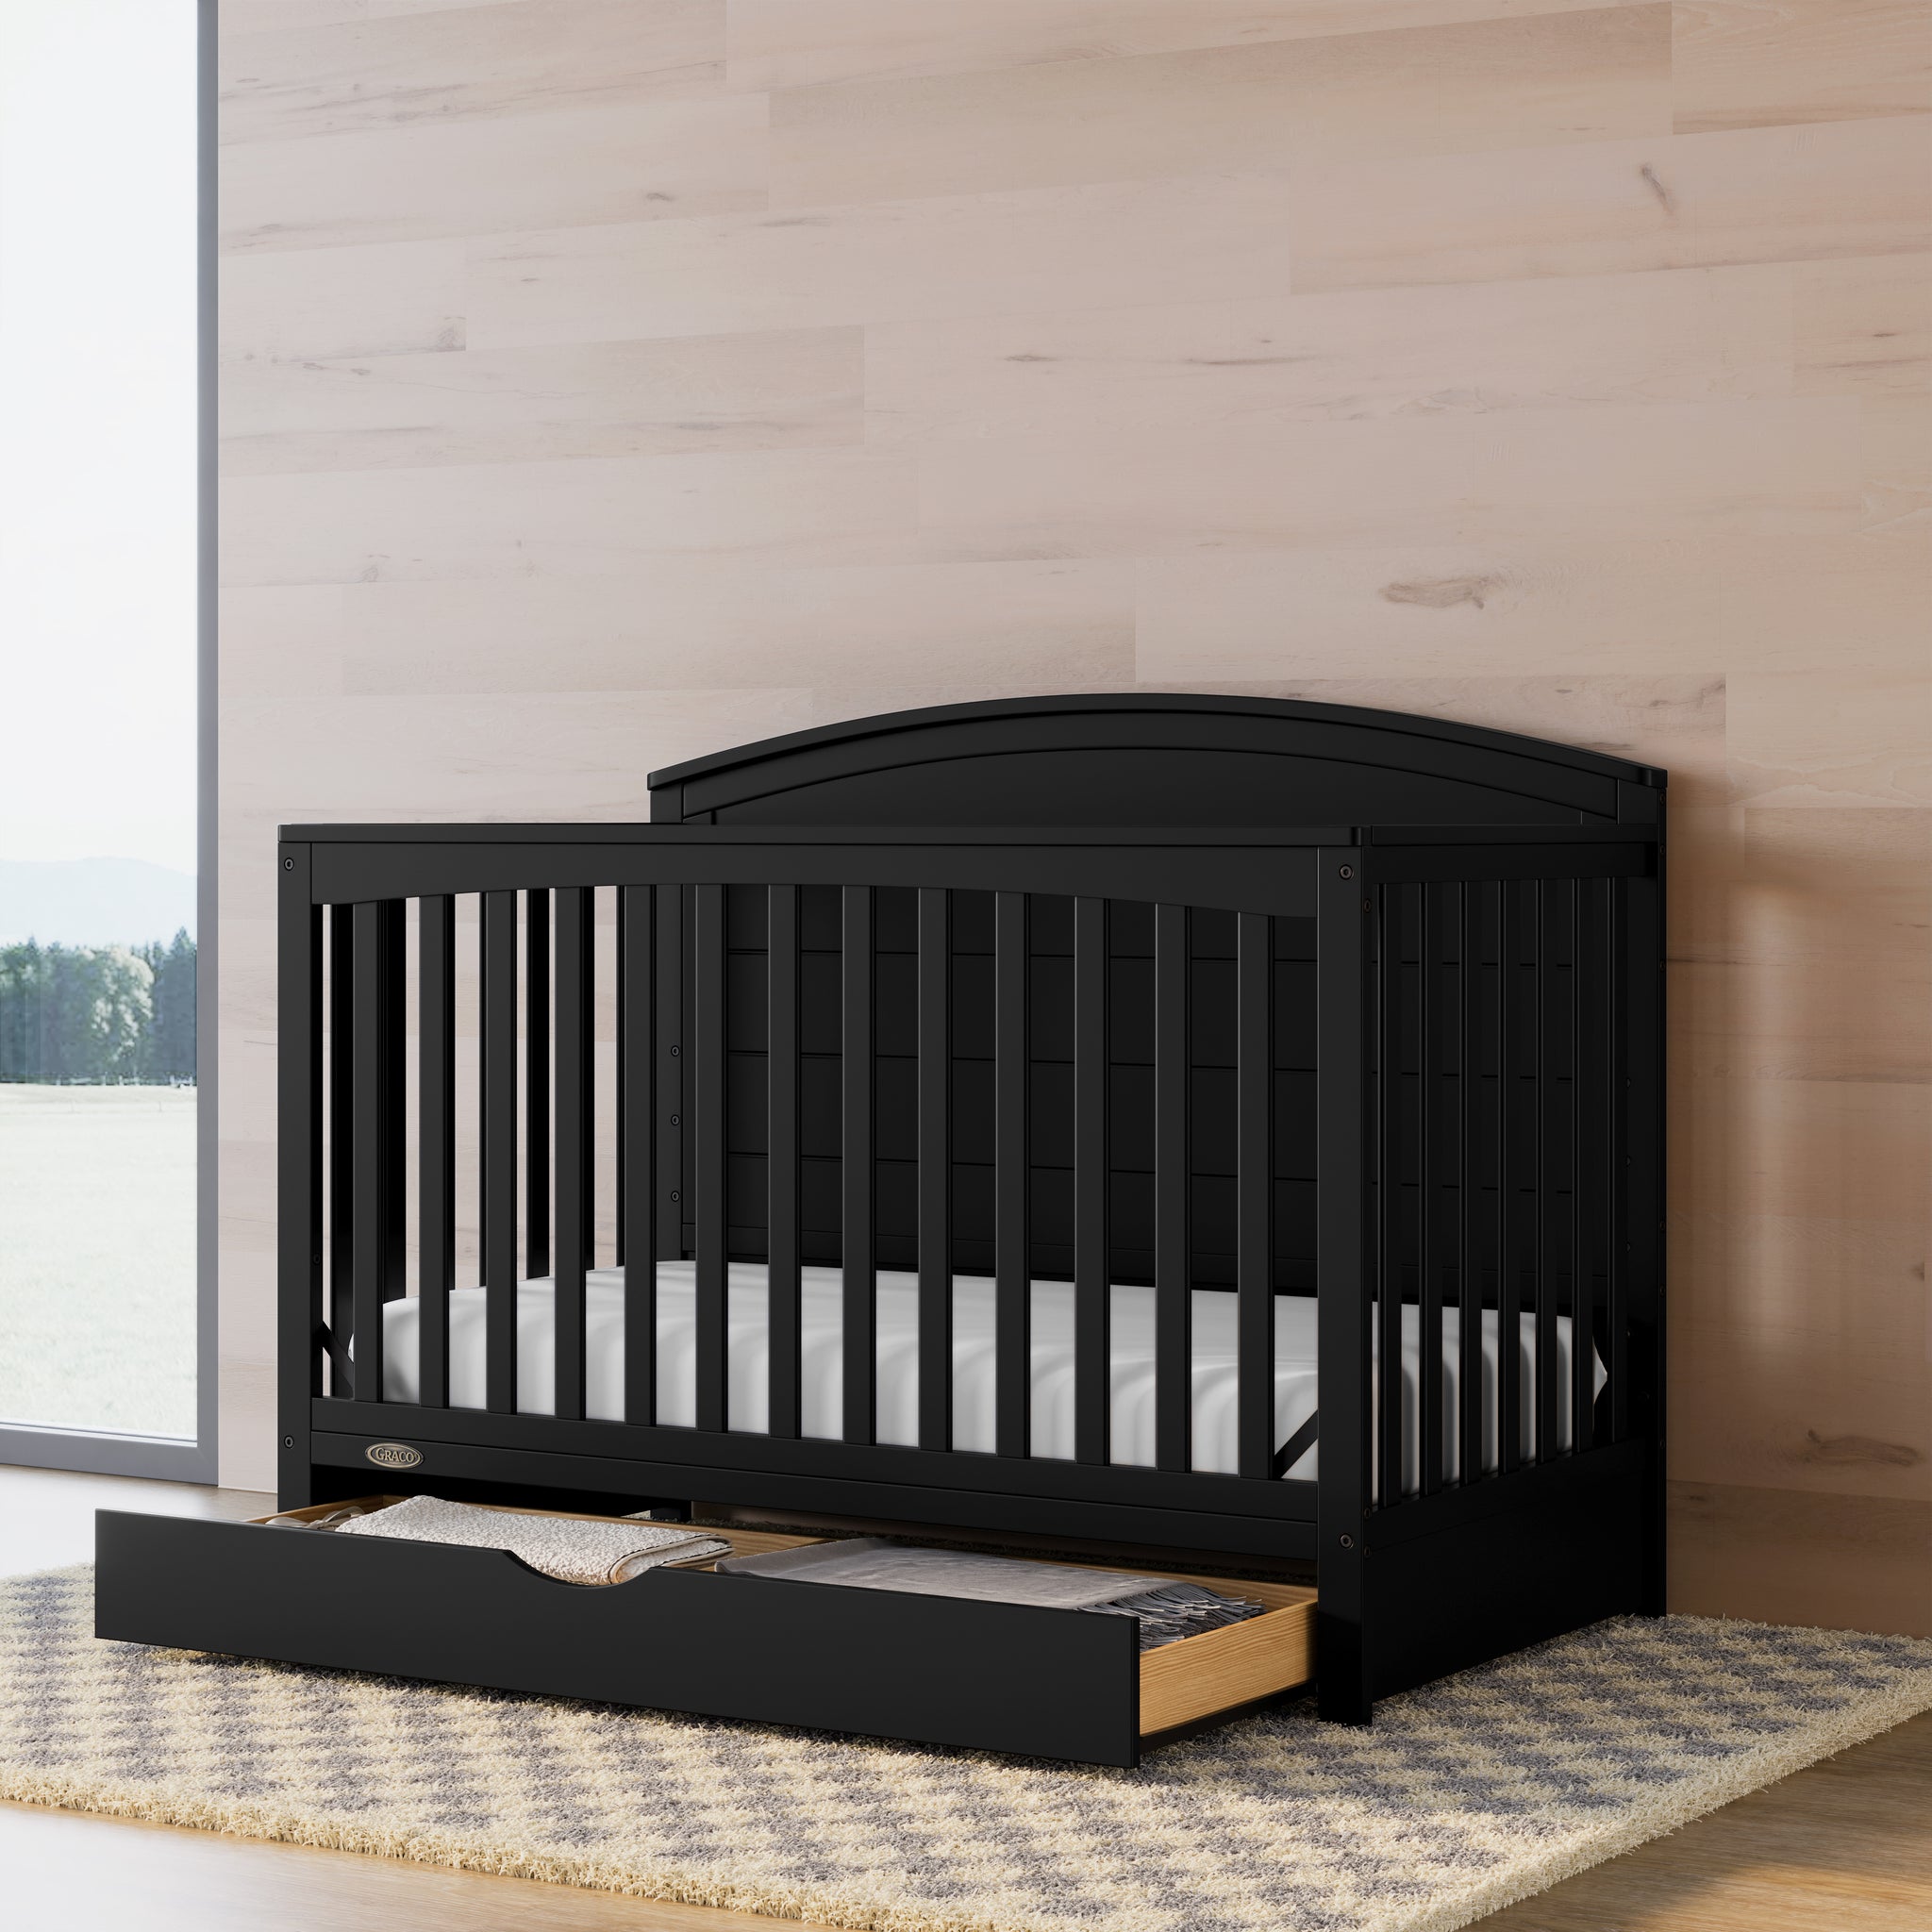 Convertible black crib with an open drawer in a nursery featuring wood-tone walls.